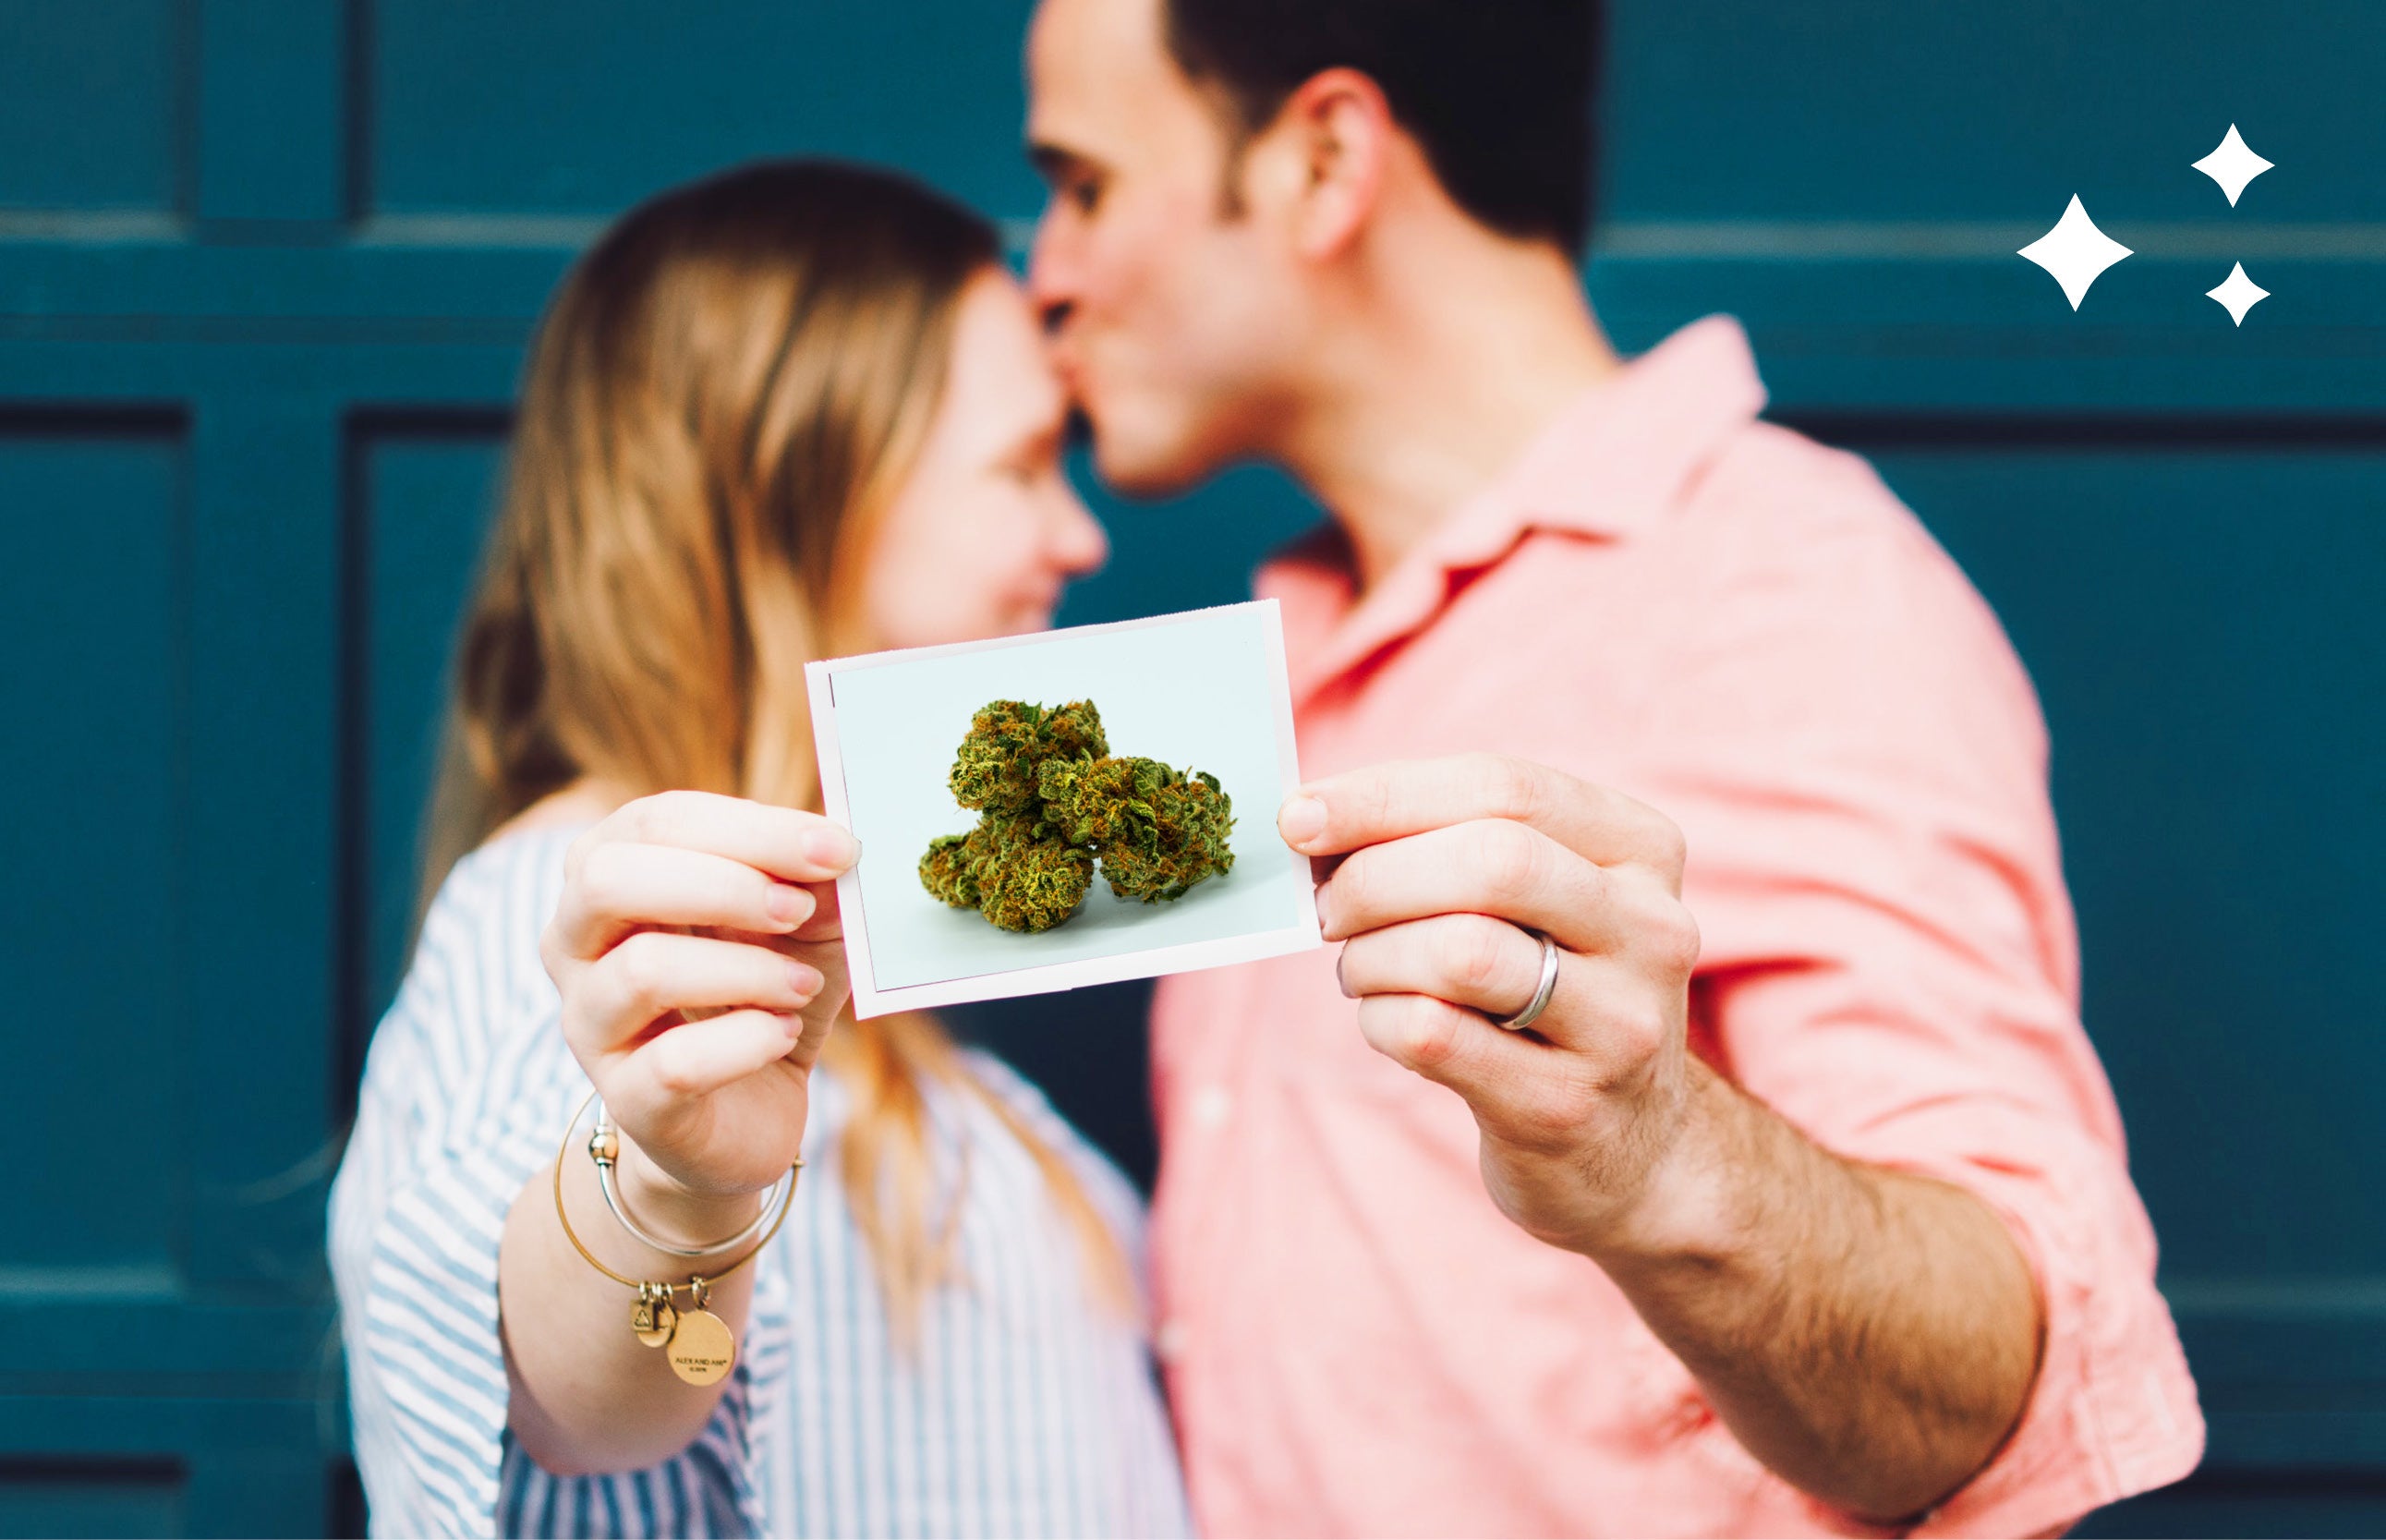 What to Expect When You’re Expecting (to Buy Weed)